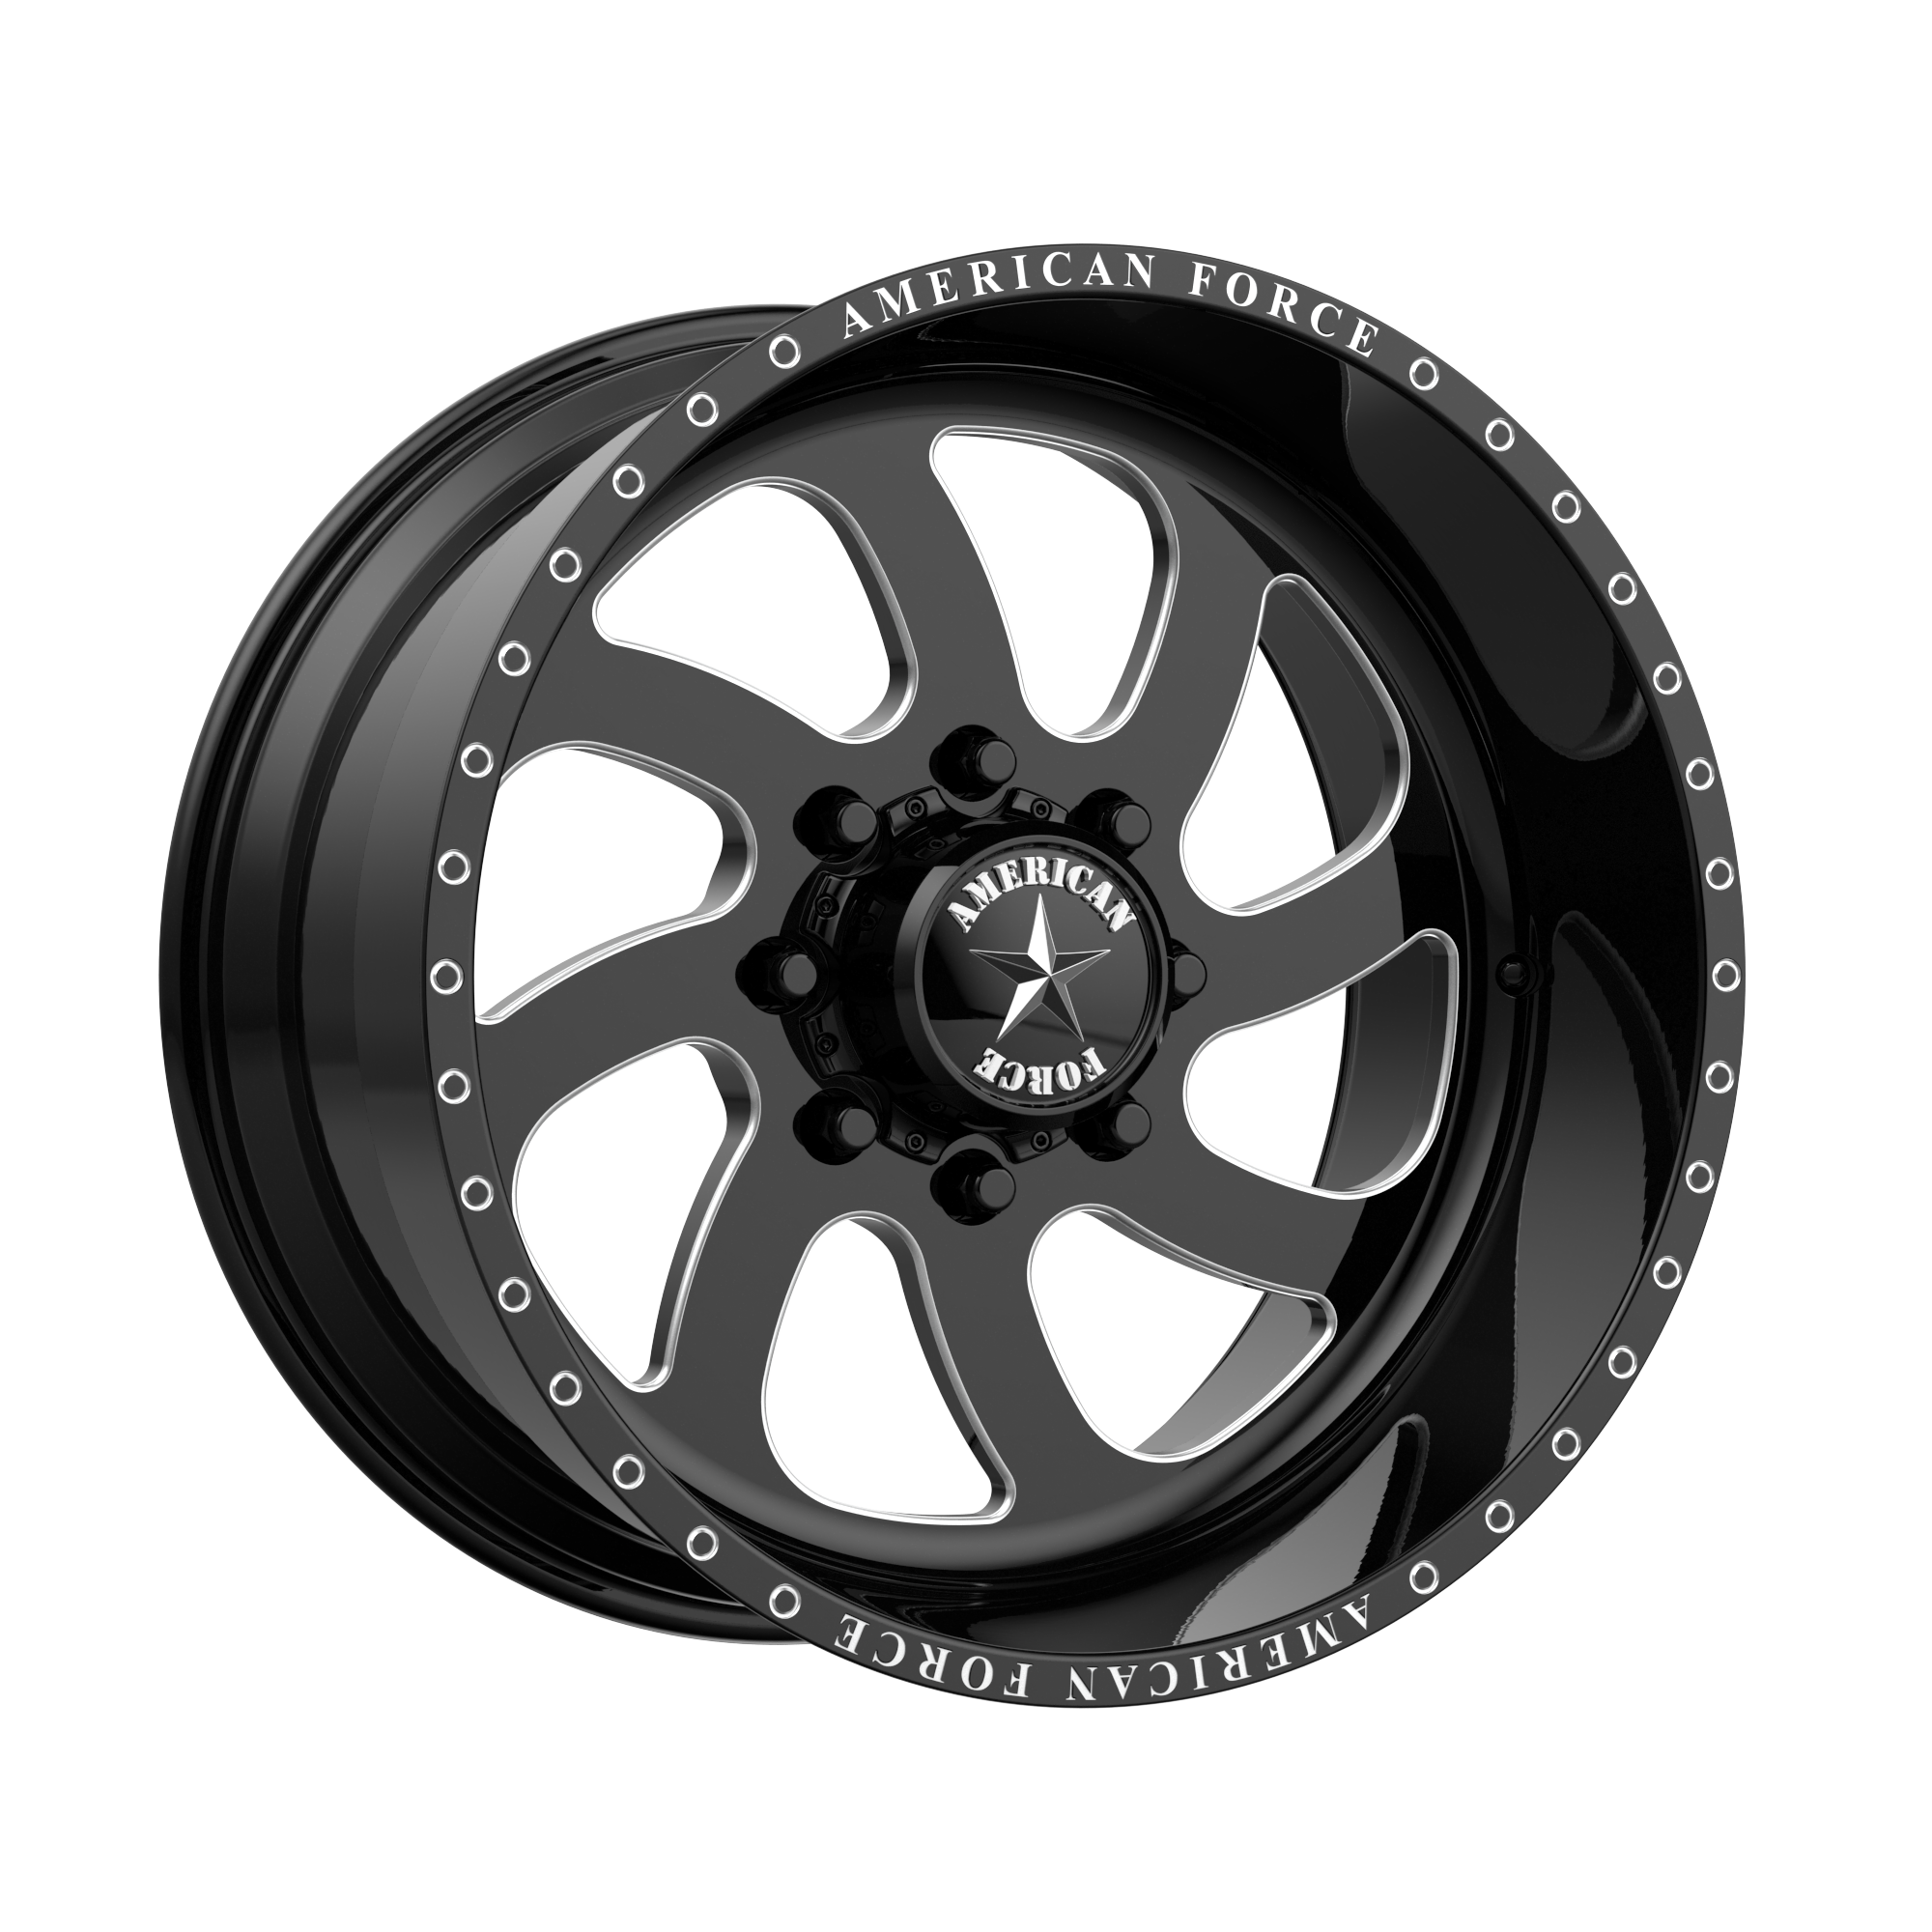 BLADE SS 20x14 6x139.70 GLOSS BLACK MACHINED (-73 mm) - Tires and Engine Performance